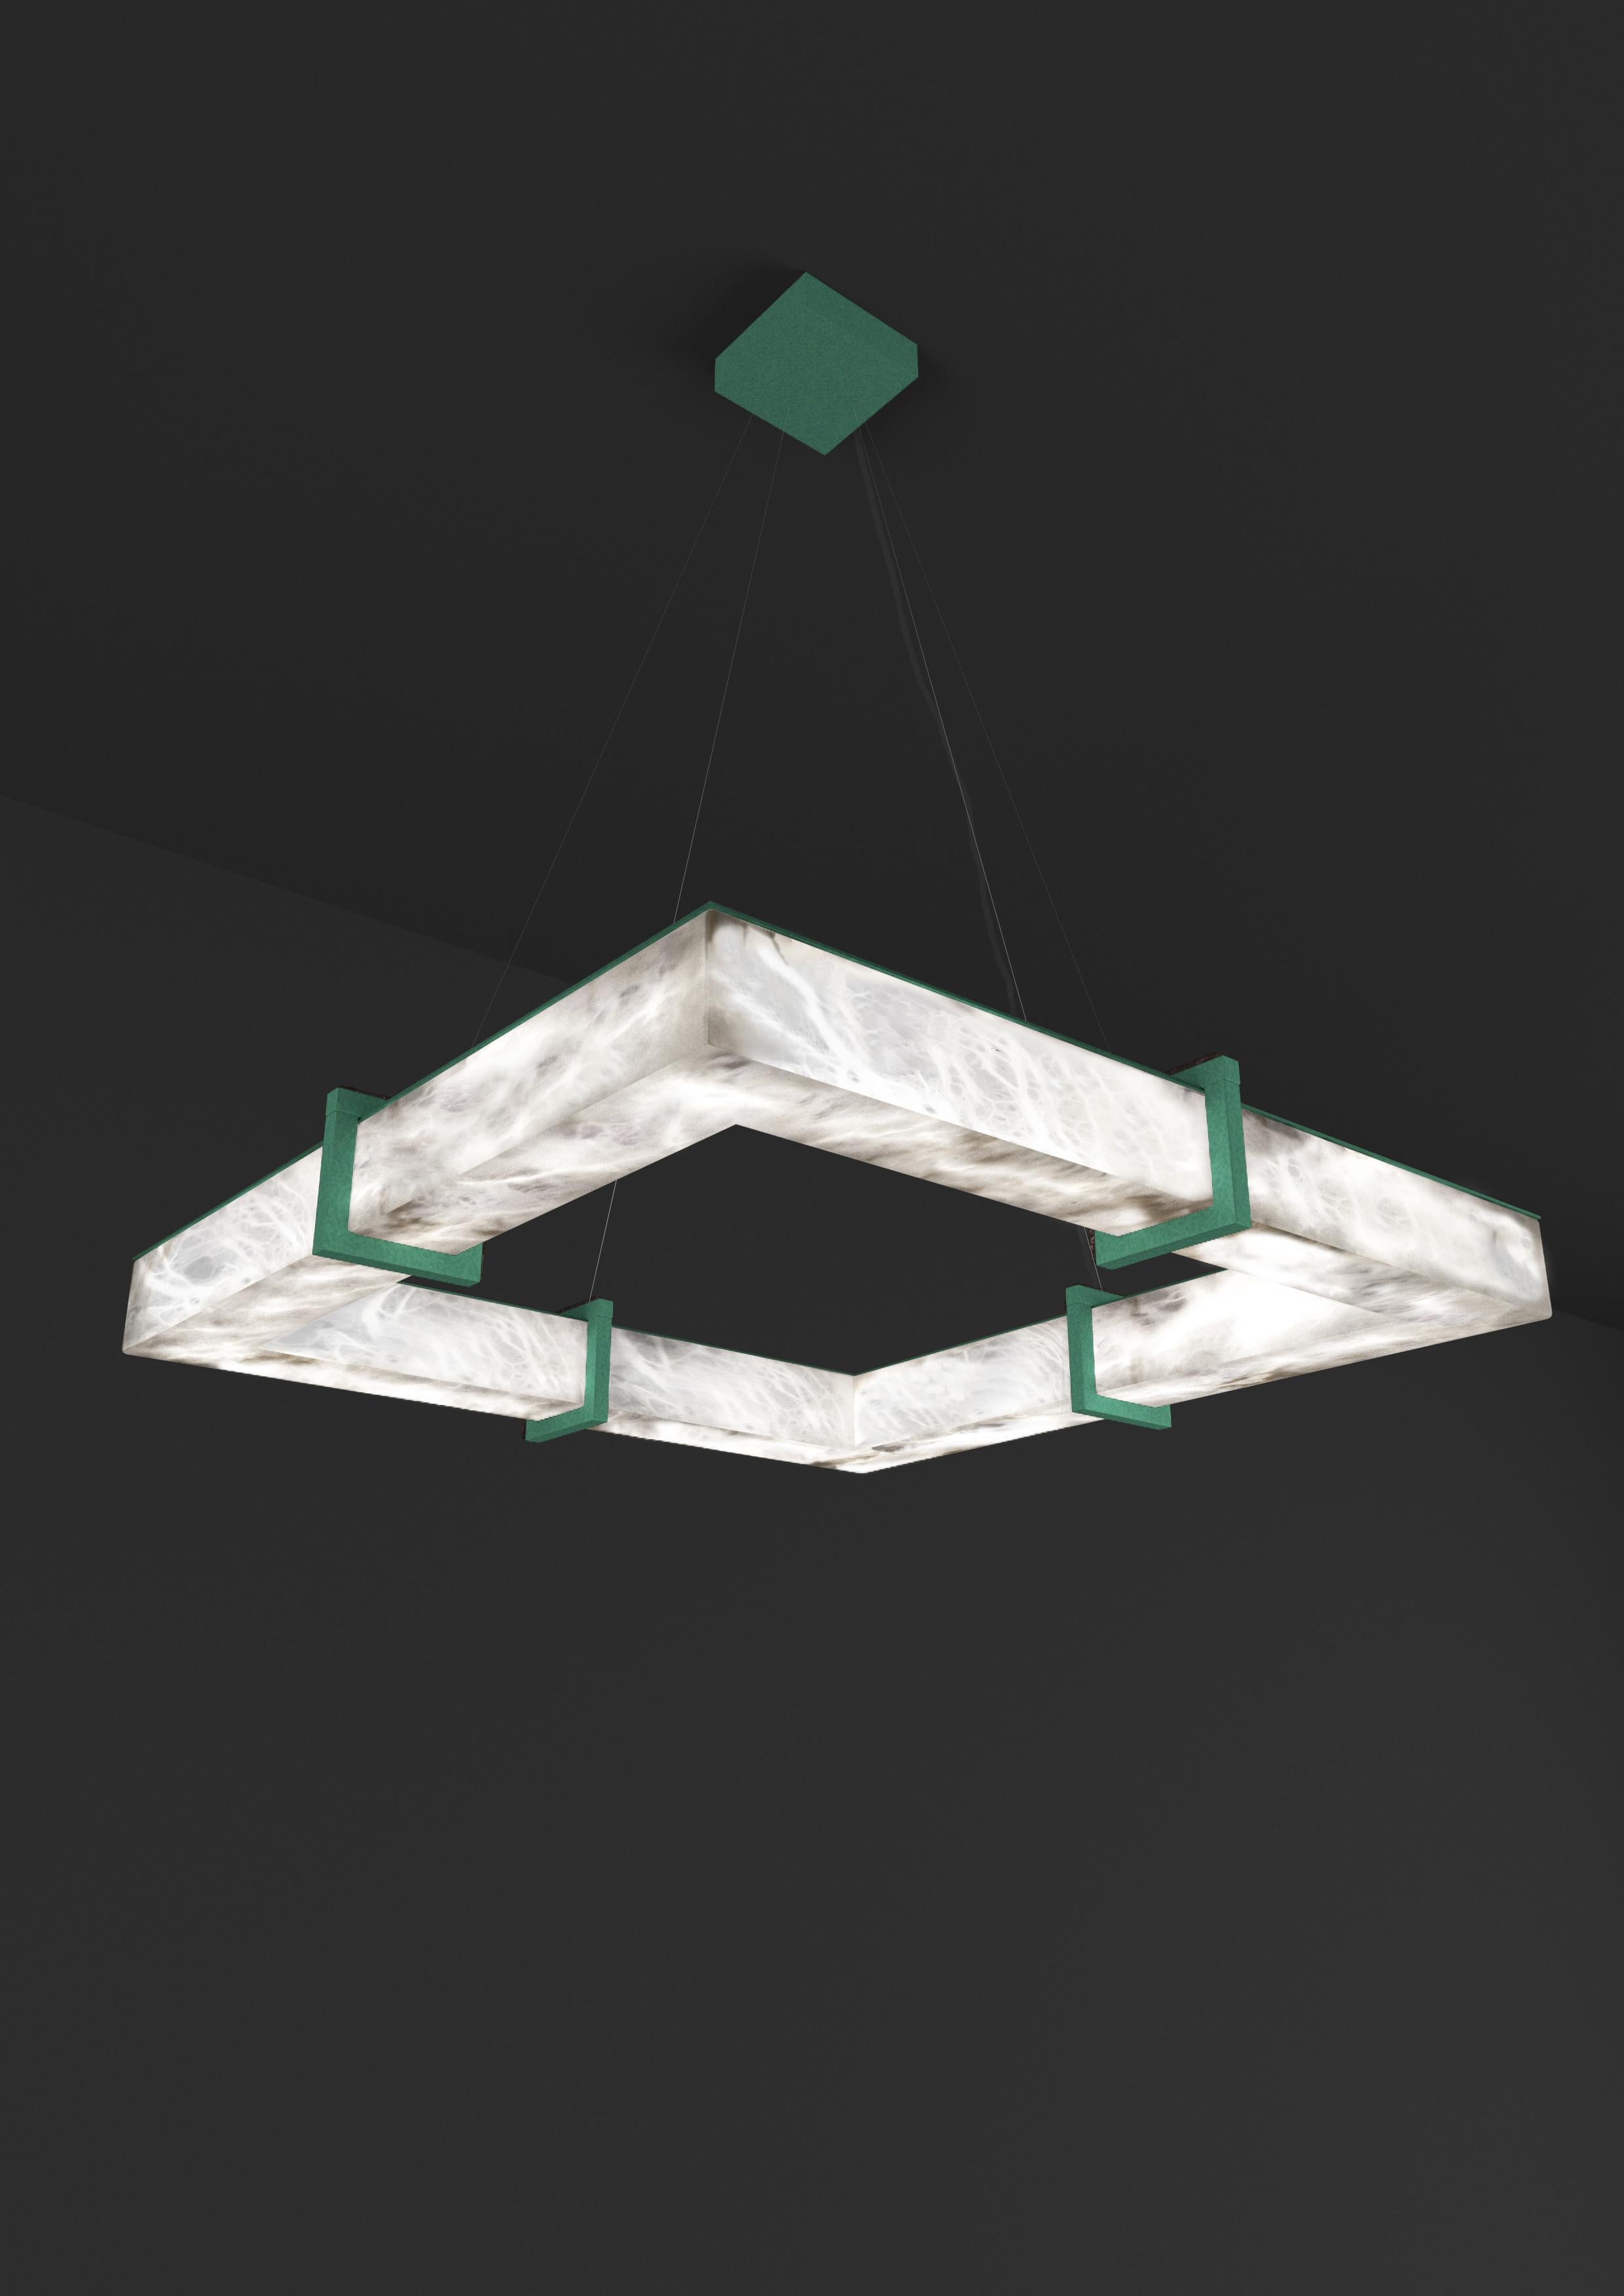 Talassa Freedom Green Metal Pendant Lamp by Alabastro Italiano
Dimensions: D 80 x W 80 x H 11 cm.
Materials: White alabaster and metal.

Available in different finishes: Shiny Silver, Bronze, Brushed Brass, Ruggine of Florence, Brushed Burnished,